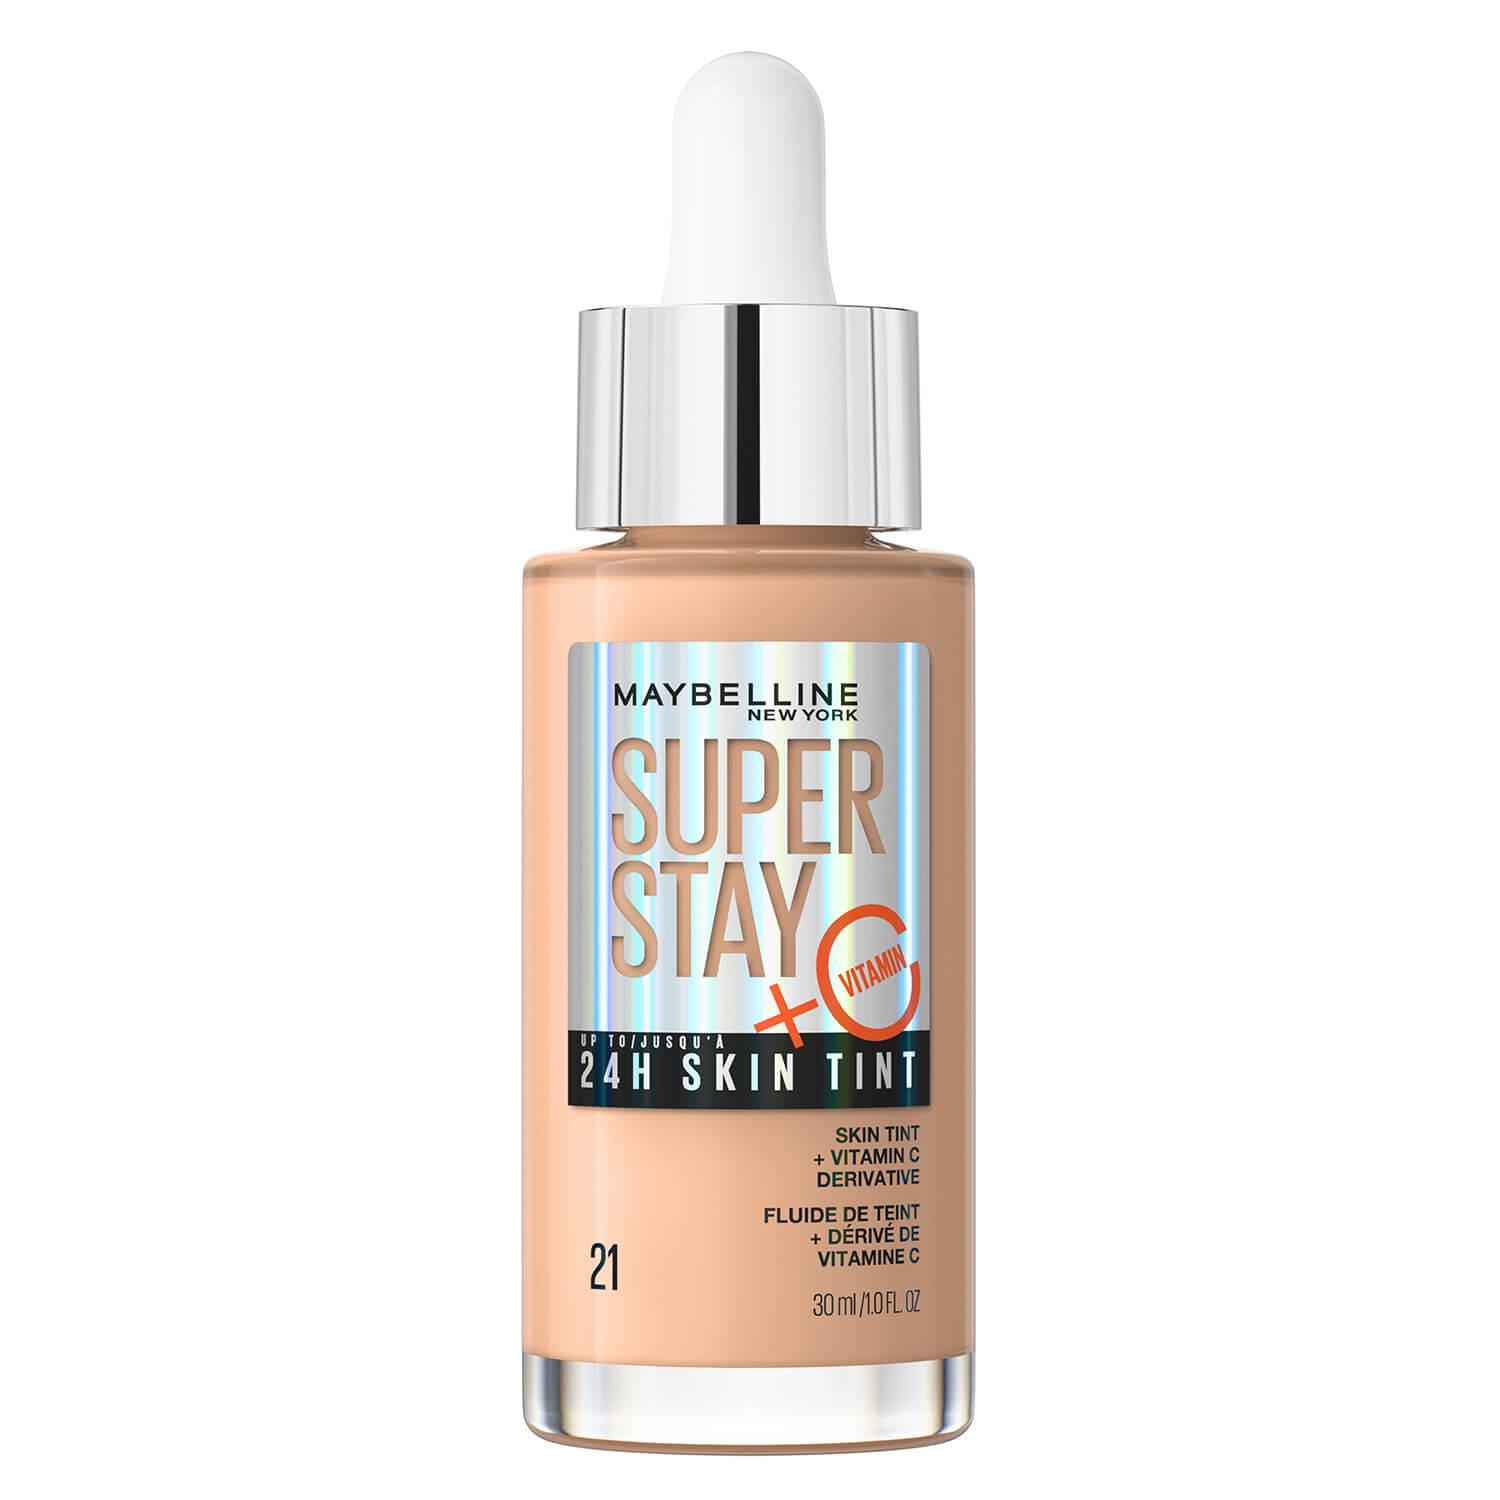 Maybelline NY Teint - Super Stay 24H Skin Tint Nude Beige 21